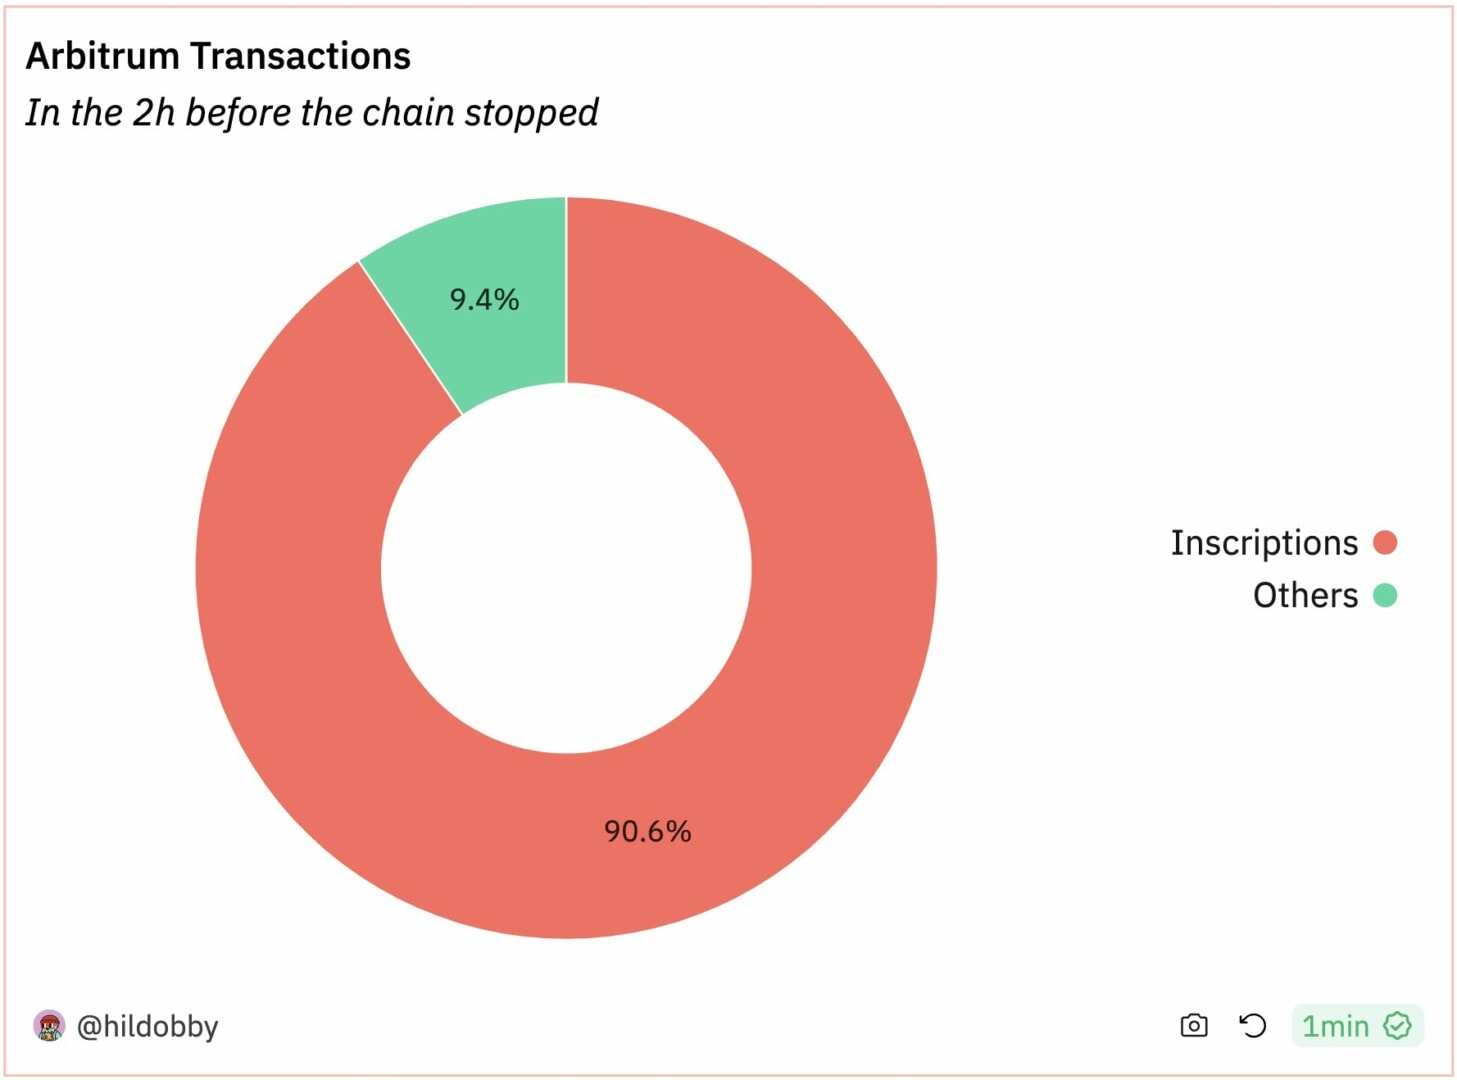 90% of transactions were Registrations before Arbitrum was discontinued